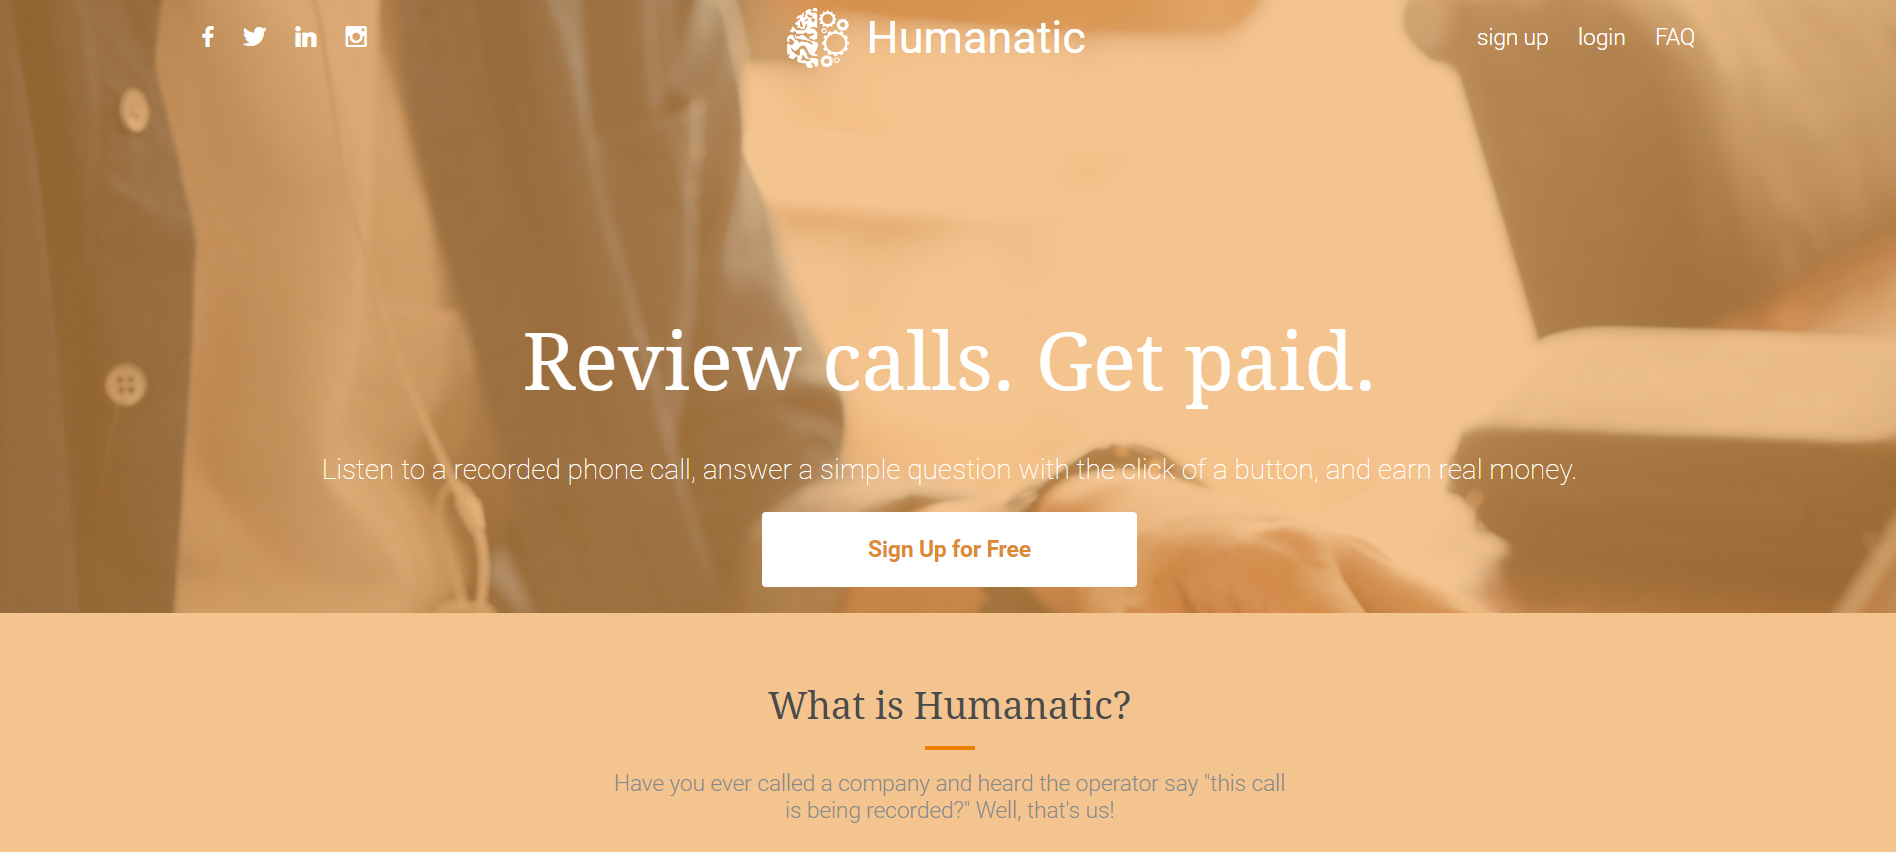 Humanatic: Review Calls and Get Paid